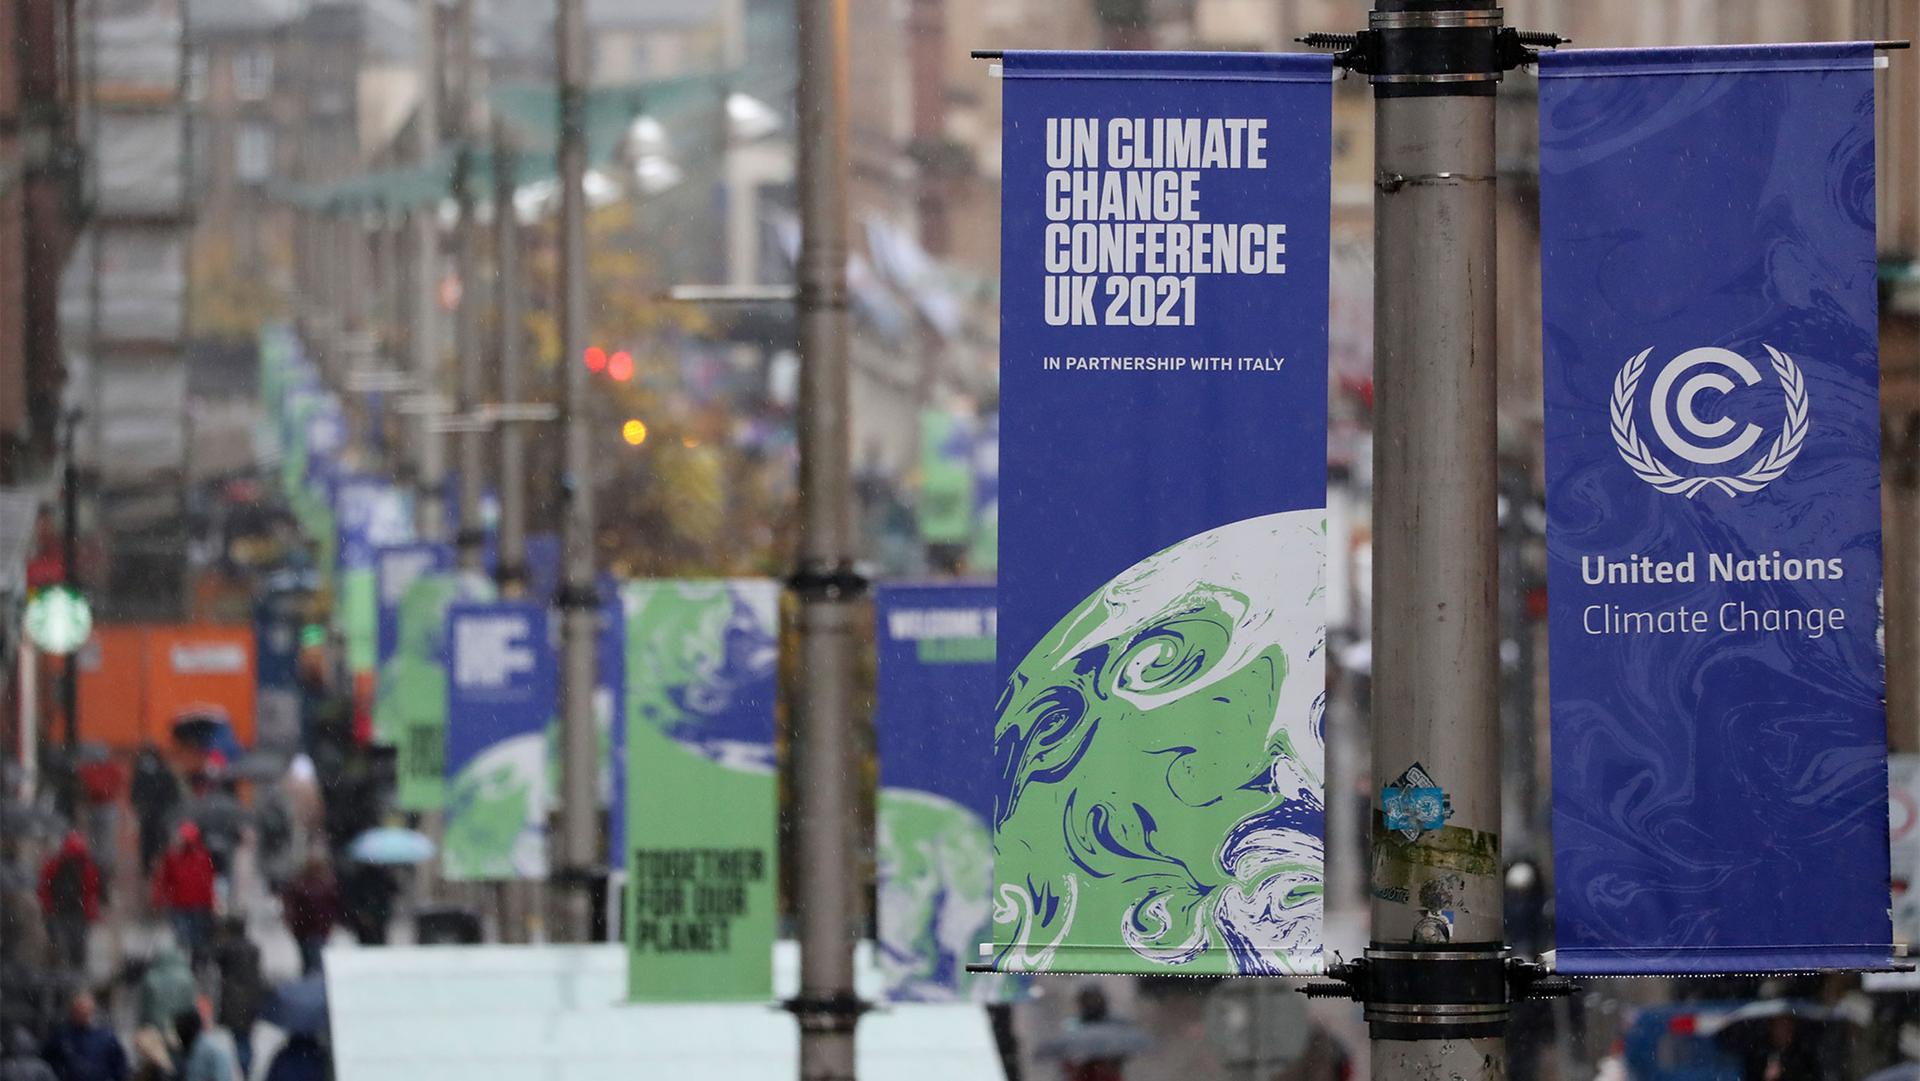 The view of banners for the UN climate conference COP26 displayed in central Glasgow, Scotland